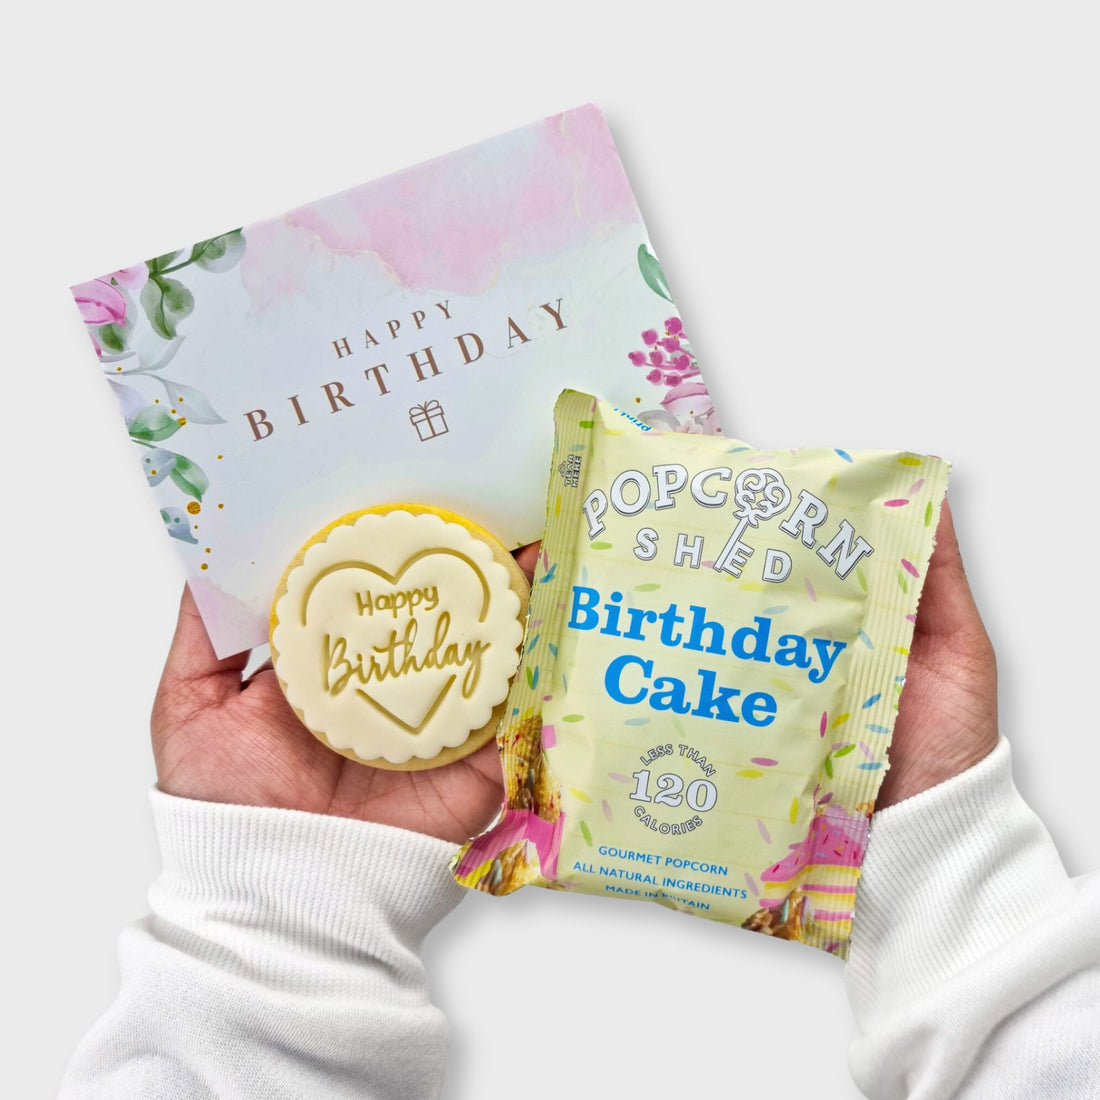 Mini birthday gift birthday card, birthday popcorn and happy birthday biscuit from heavenly boxes